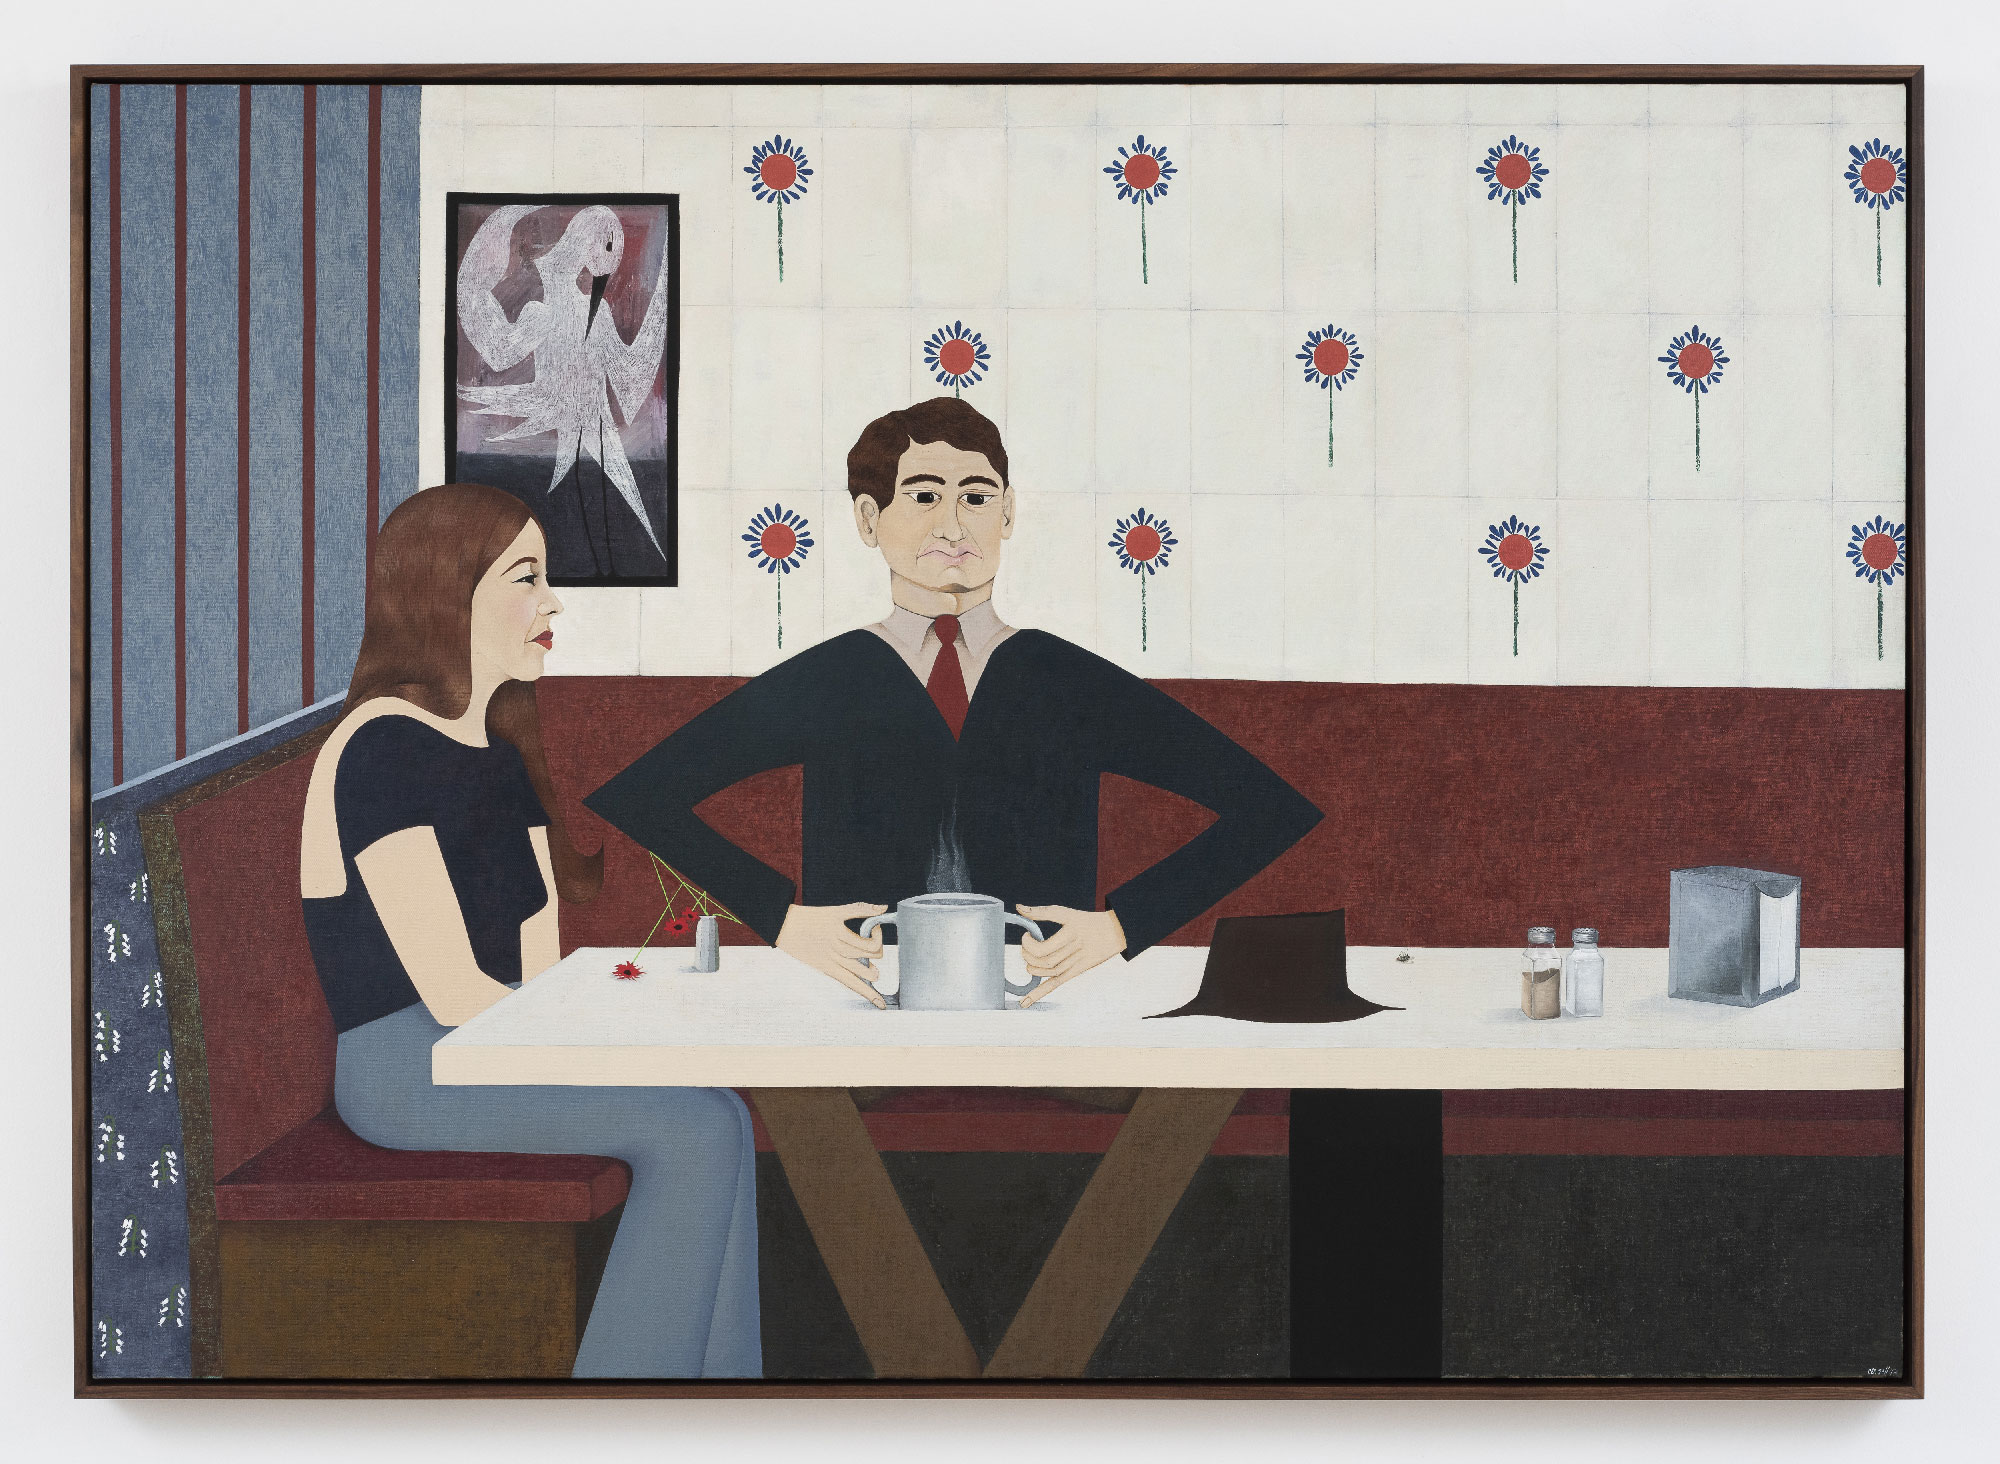 painting of woman and man seated at diner booth